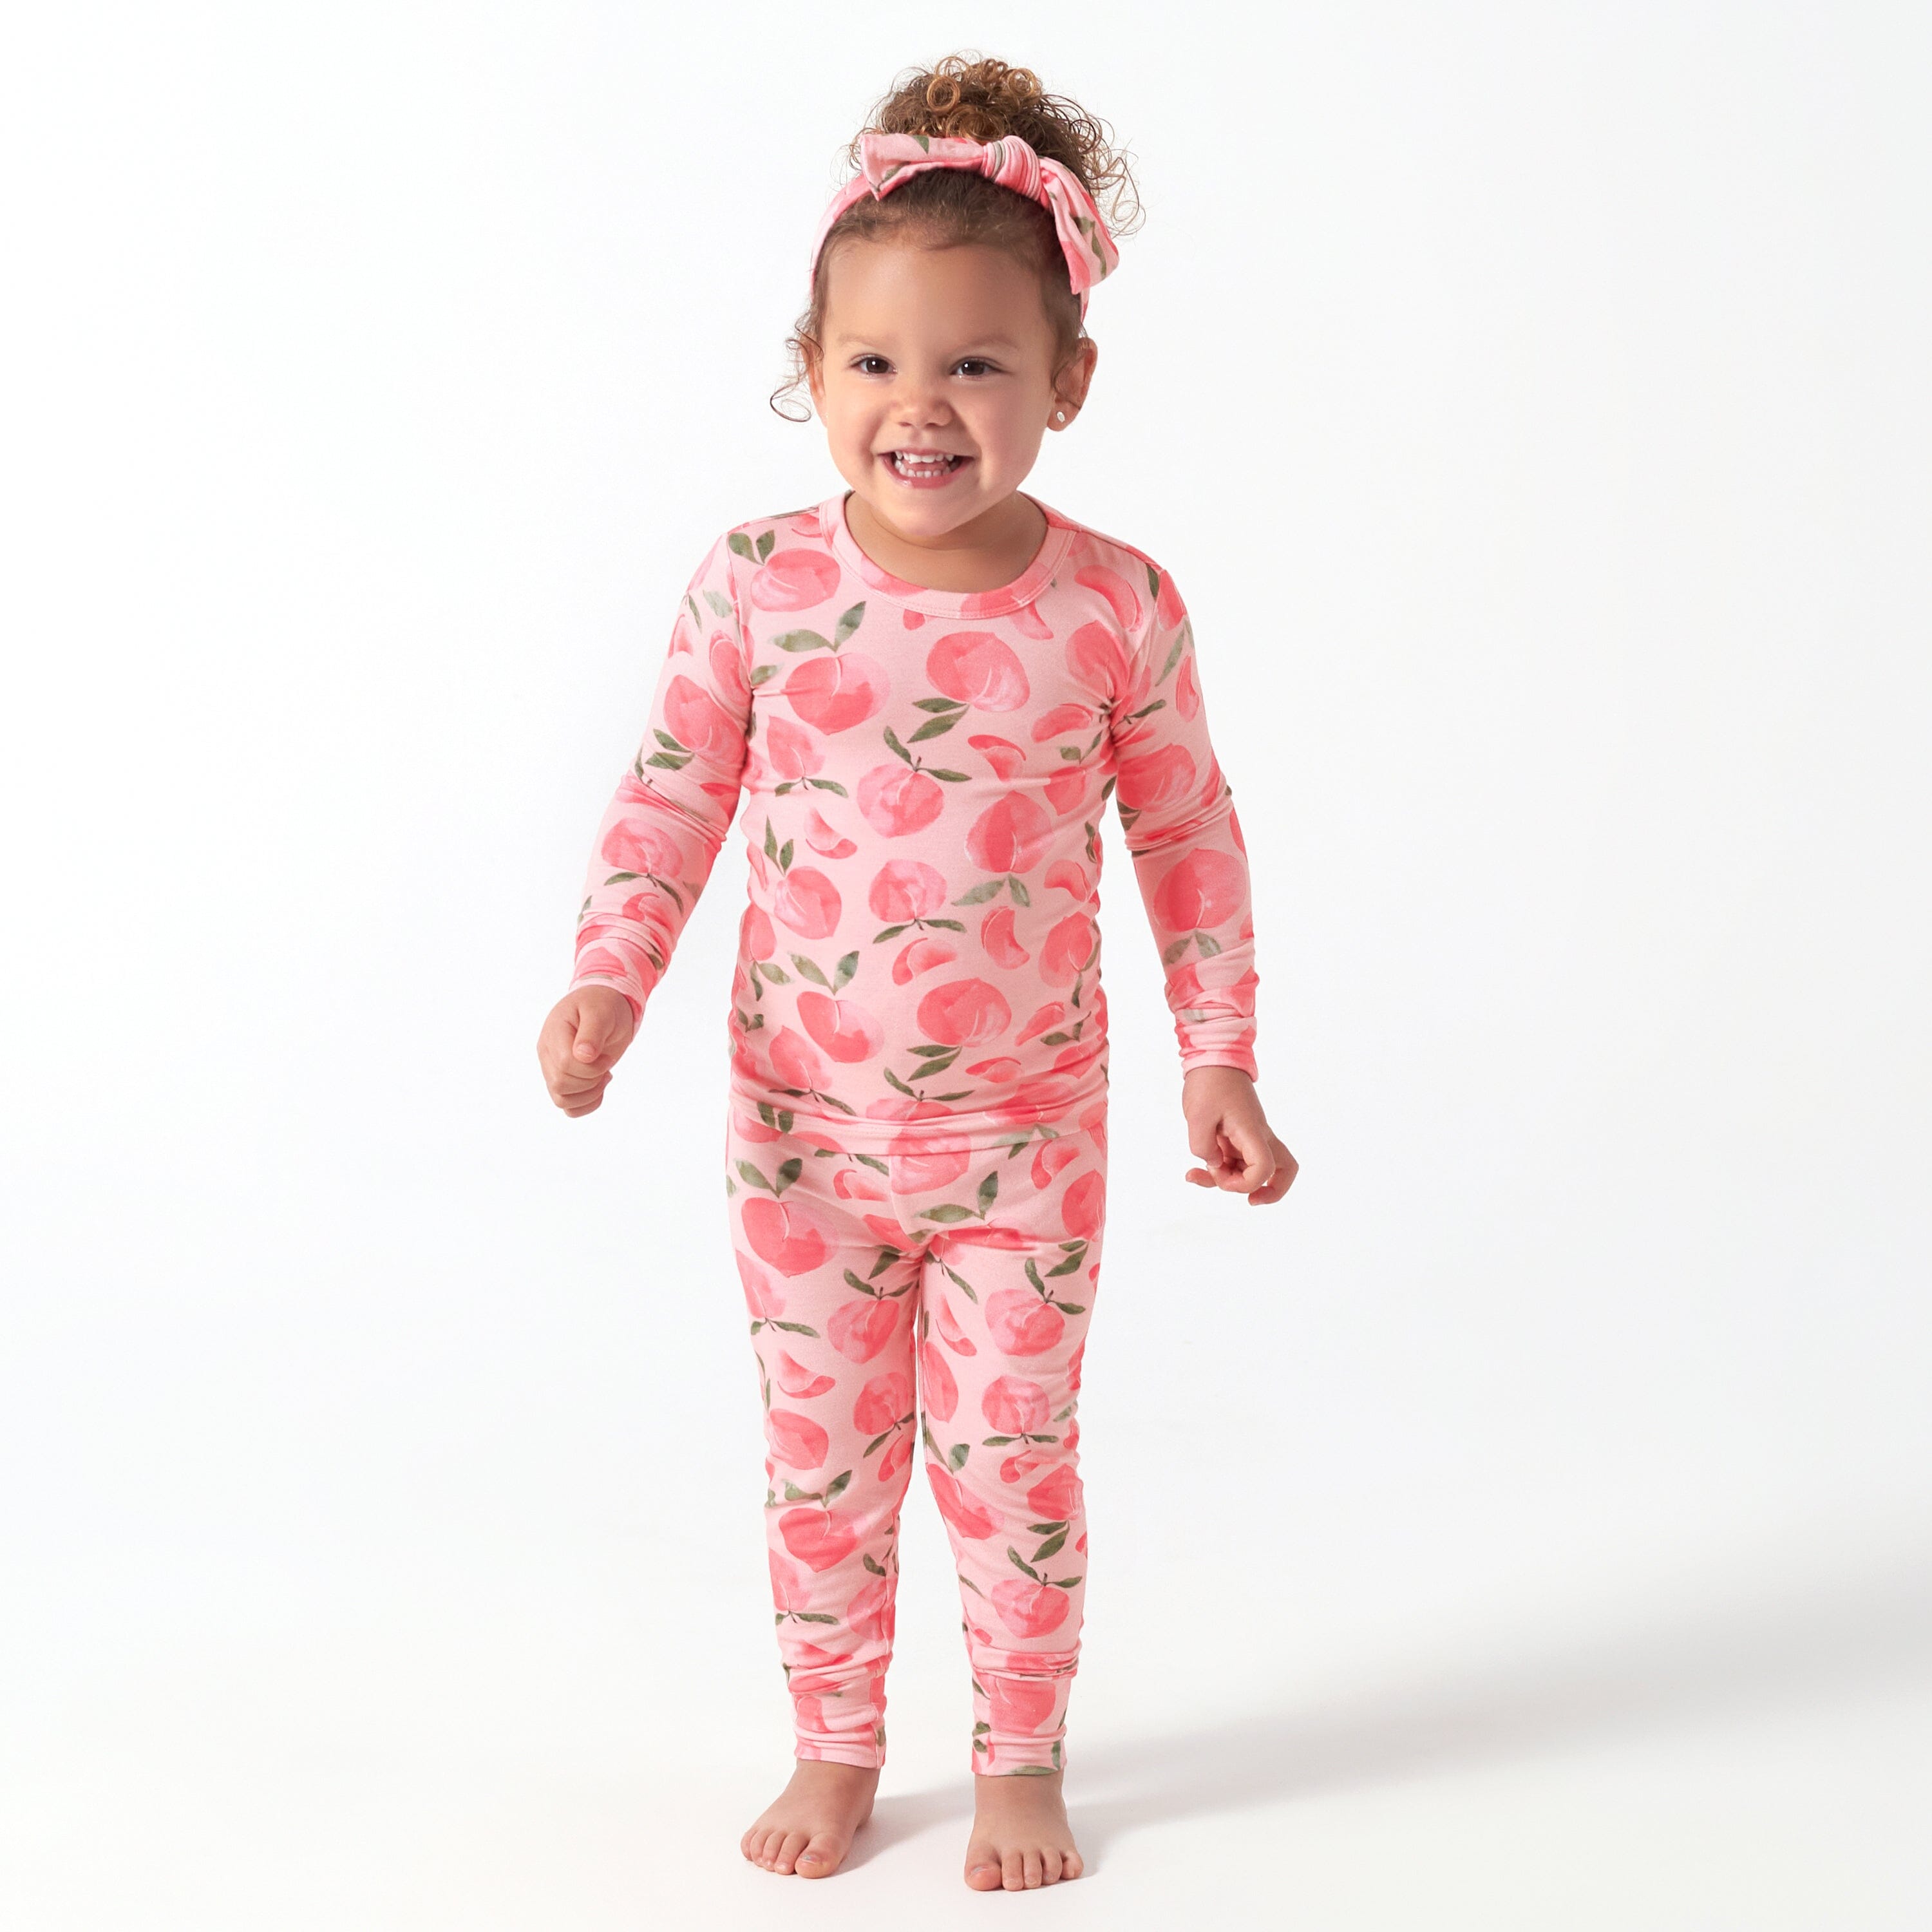 2-Piece Infant & Toddler Girls Just Peachy Buttery Soft Viscose Made f ...